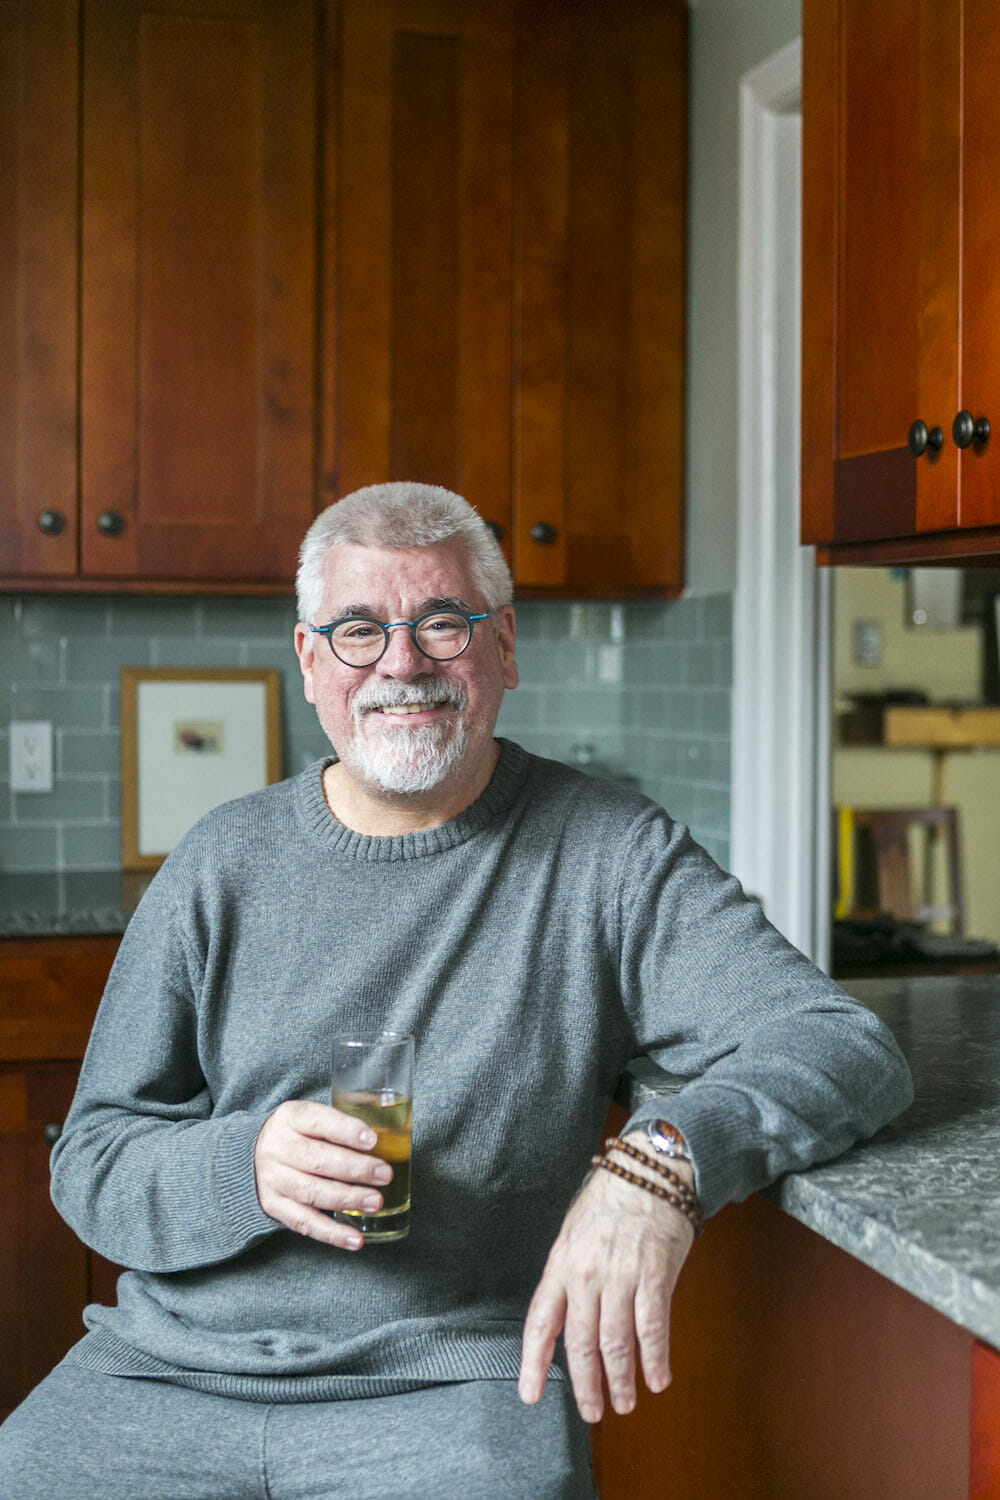 ed sitting in his kitchen with mahogany cabinets and green backsplash and gray countertop after renovation